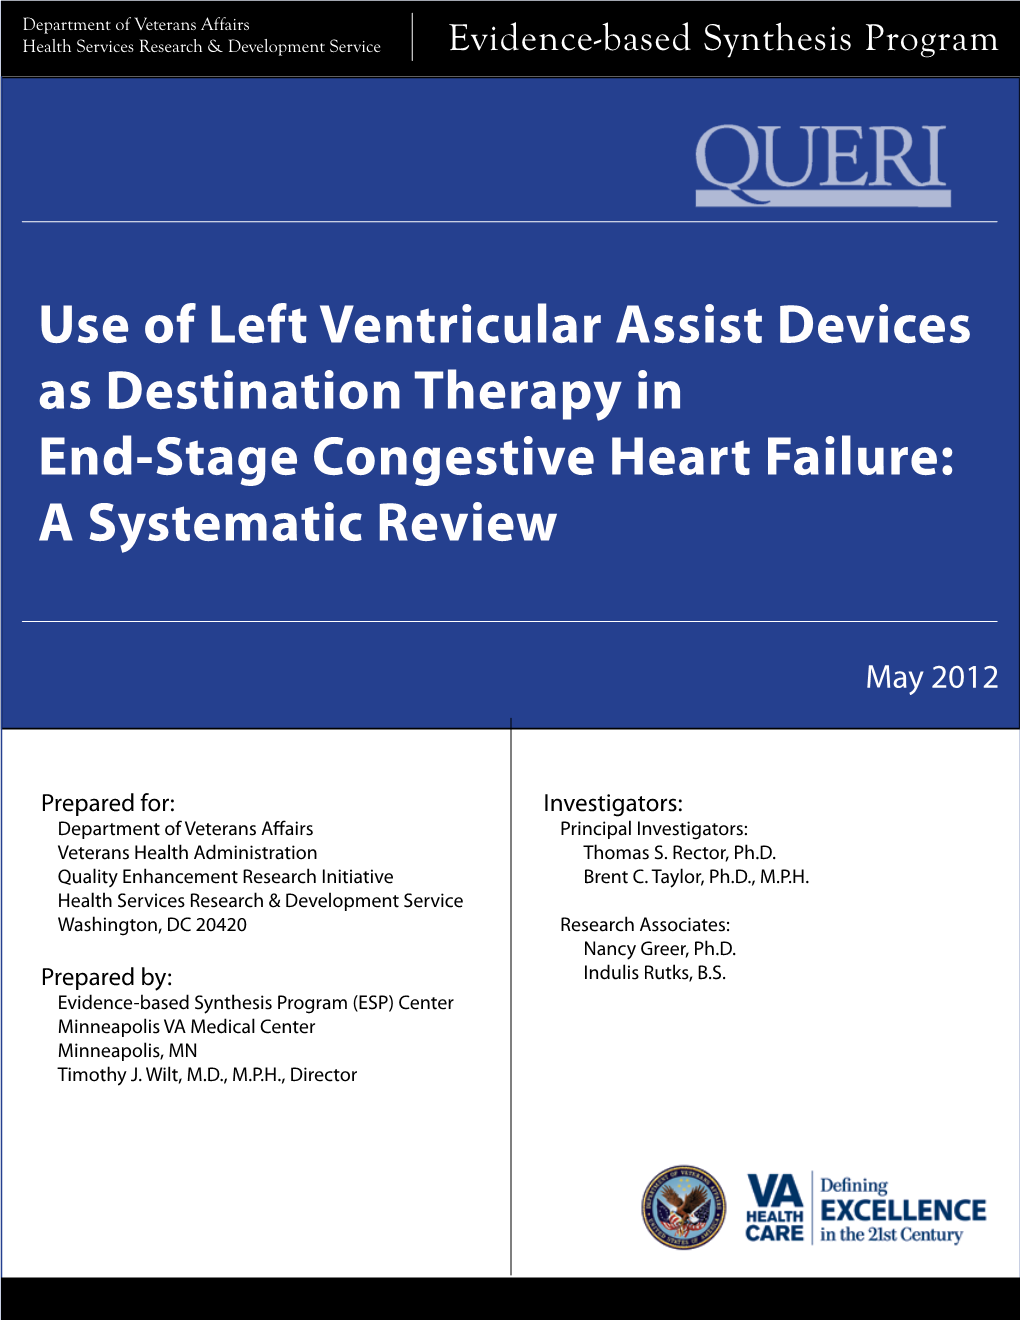 Use of Left Ventricular Assist Devices As Destination Therapy in End-Stage Congestive Heart Failure: a Systematic Review